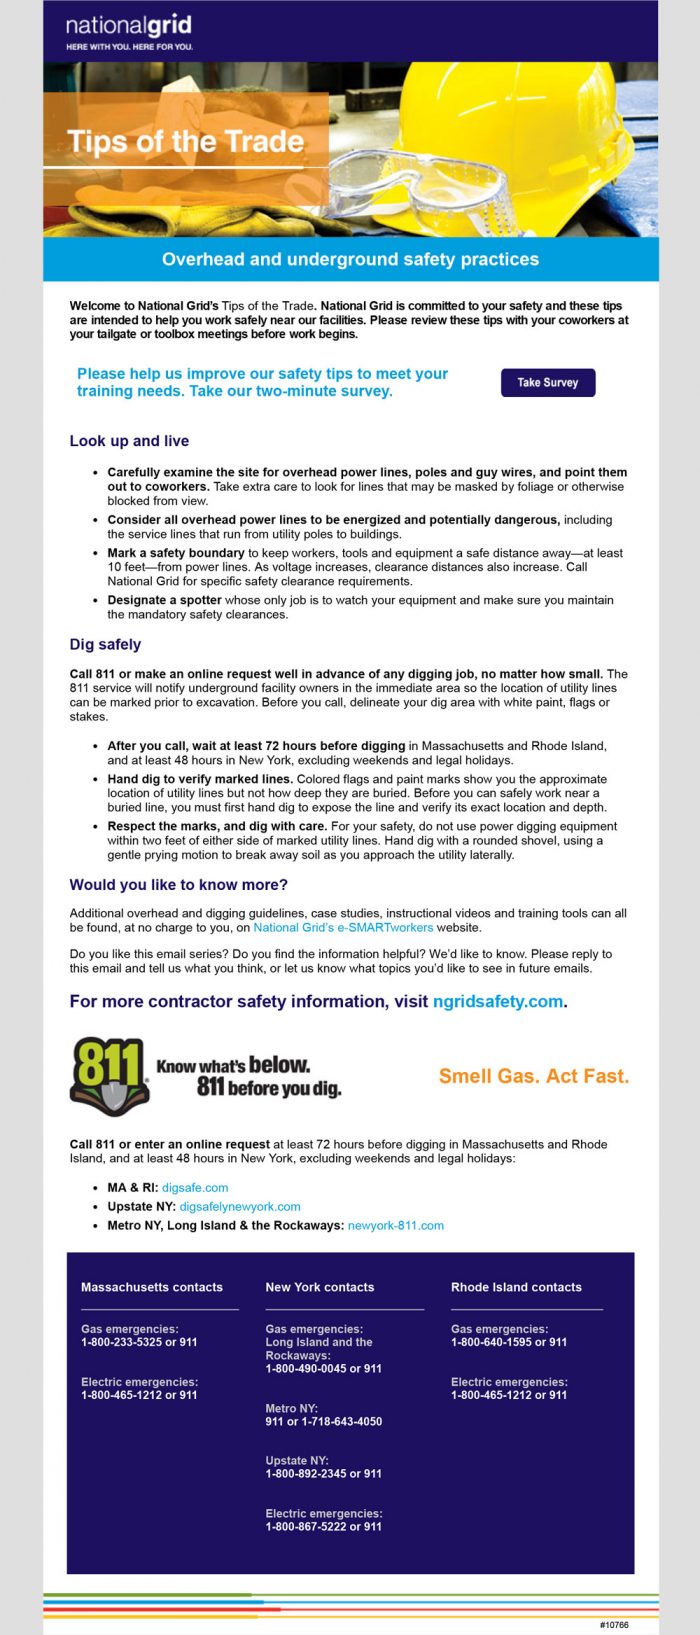 Tips of the Trade email – Overhead and underground safety practices